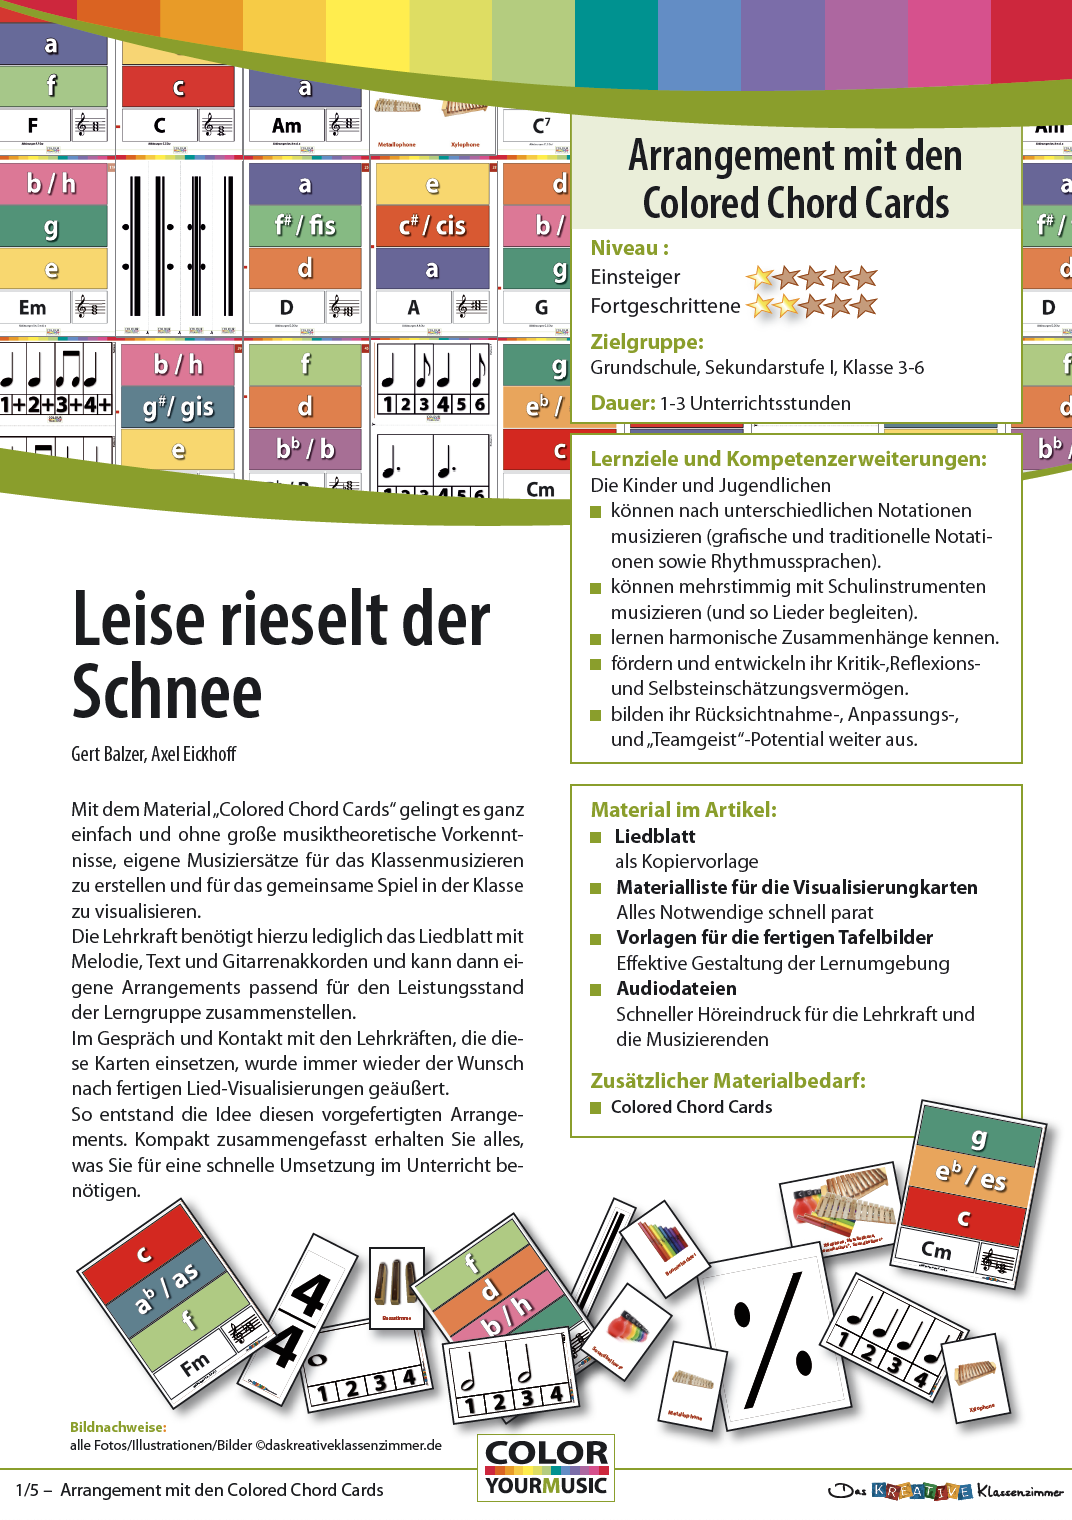 Lasst uns froh und munter sein - Colored Chord Cards